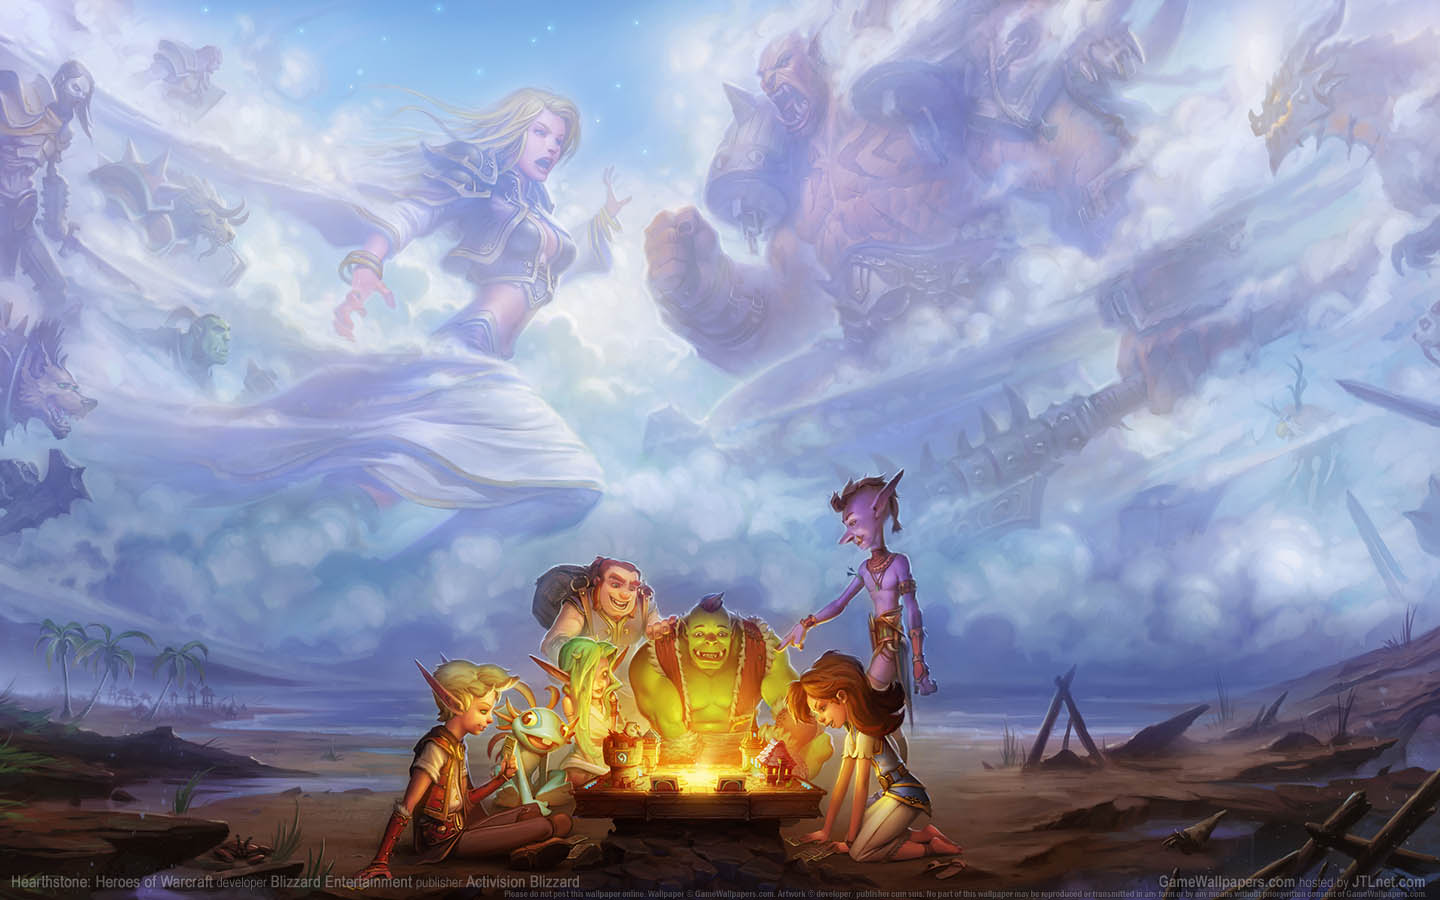 Hearthstone%3A Heroes of Warcraft wallpaper 09 1440x900